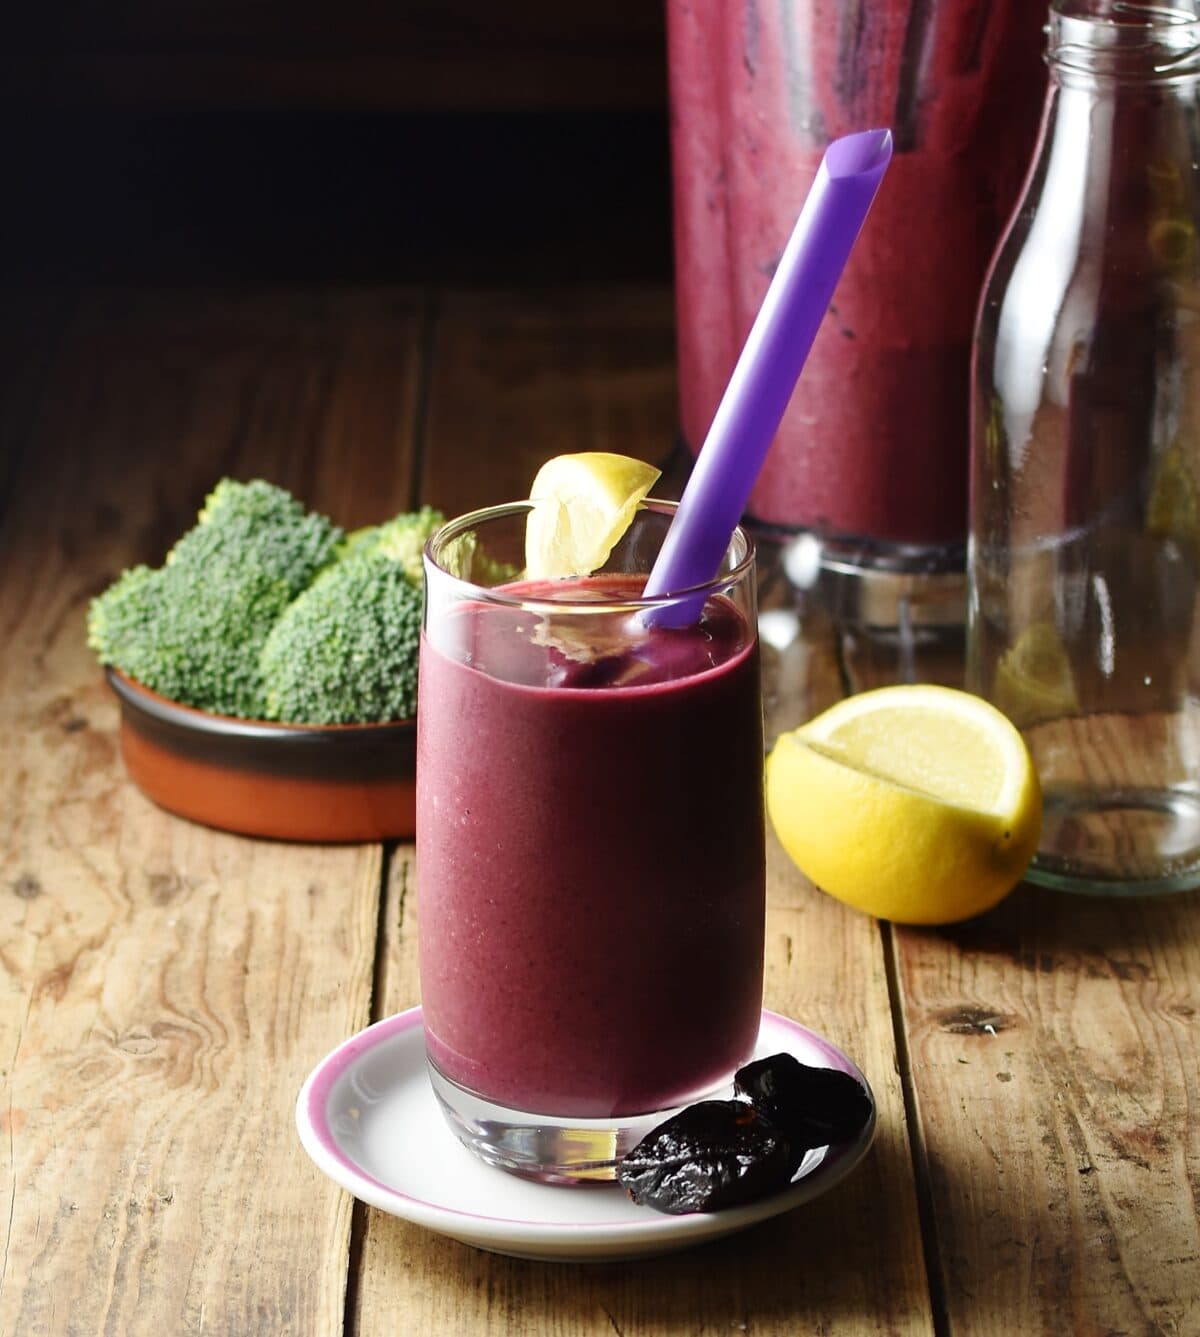 Berry broccoli smoothie in glass with purple straw on top of white saucer with prunes, lemon, broccoli and smoothie in blender in background. 